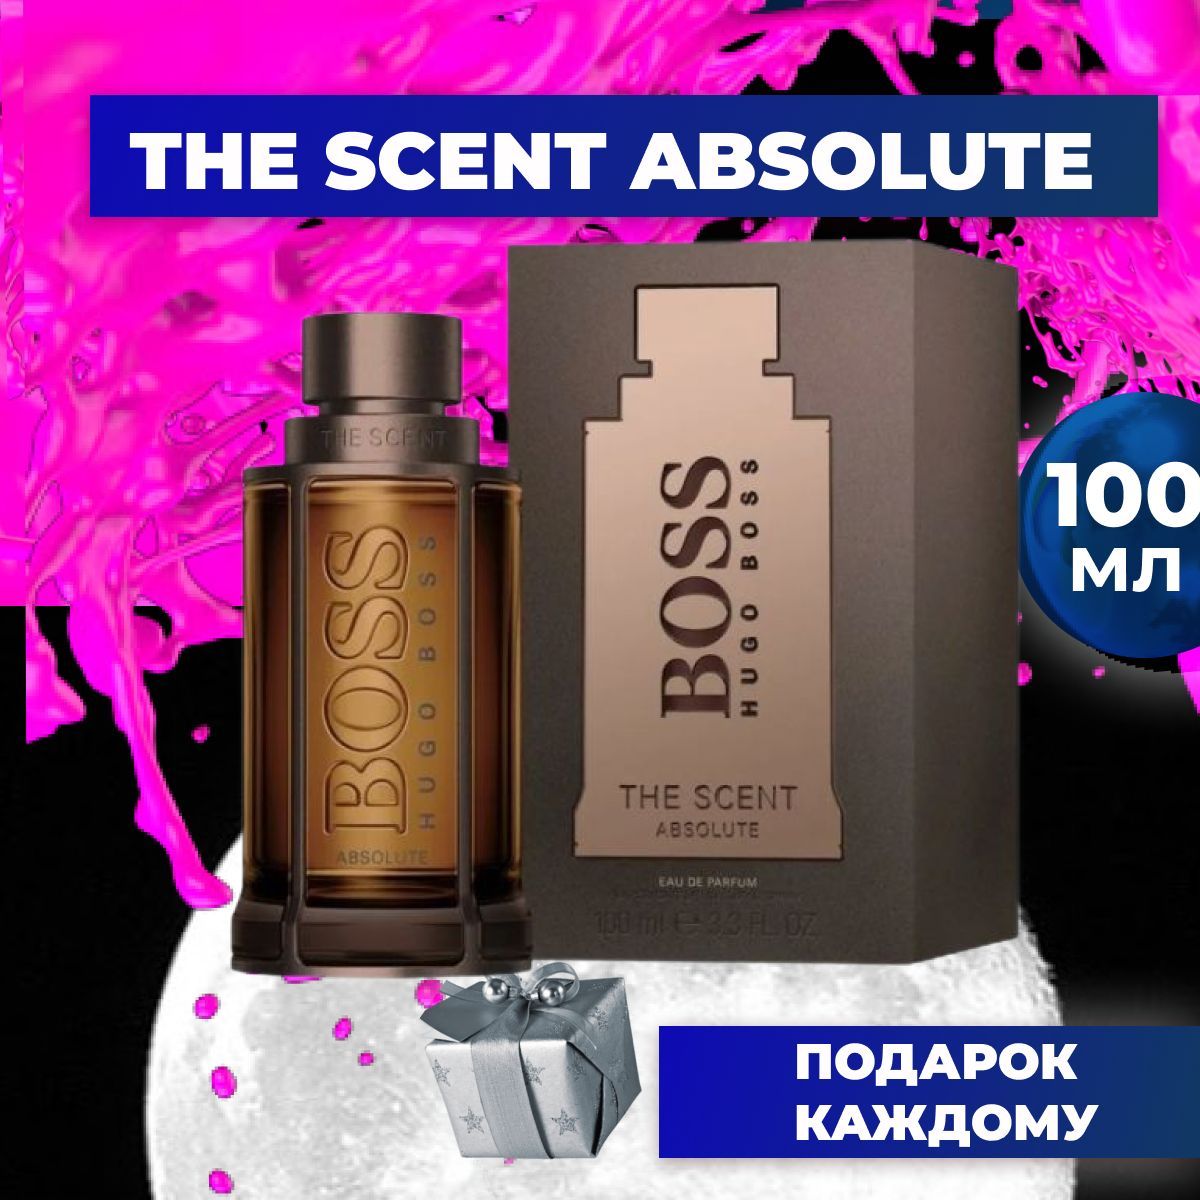 Height 100 absolute. The Scent absolute. Boss the Scent absolute. Парфюмерная вода Hugo Boss the Scent absolute for her. Absolut 100h021.